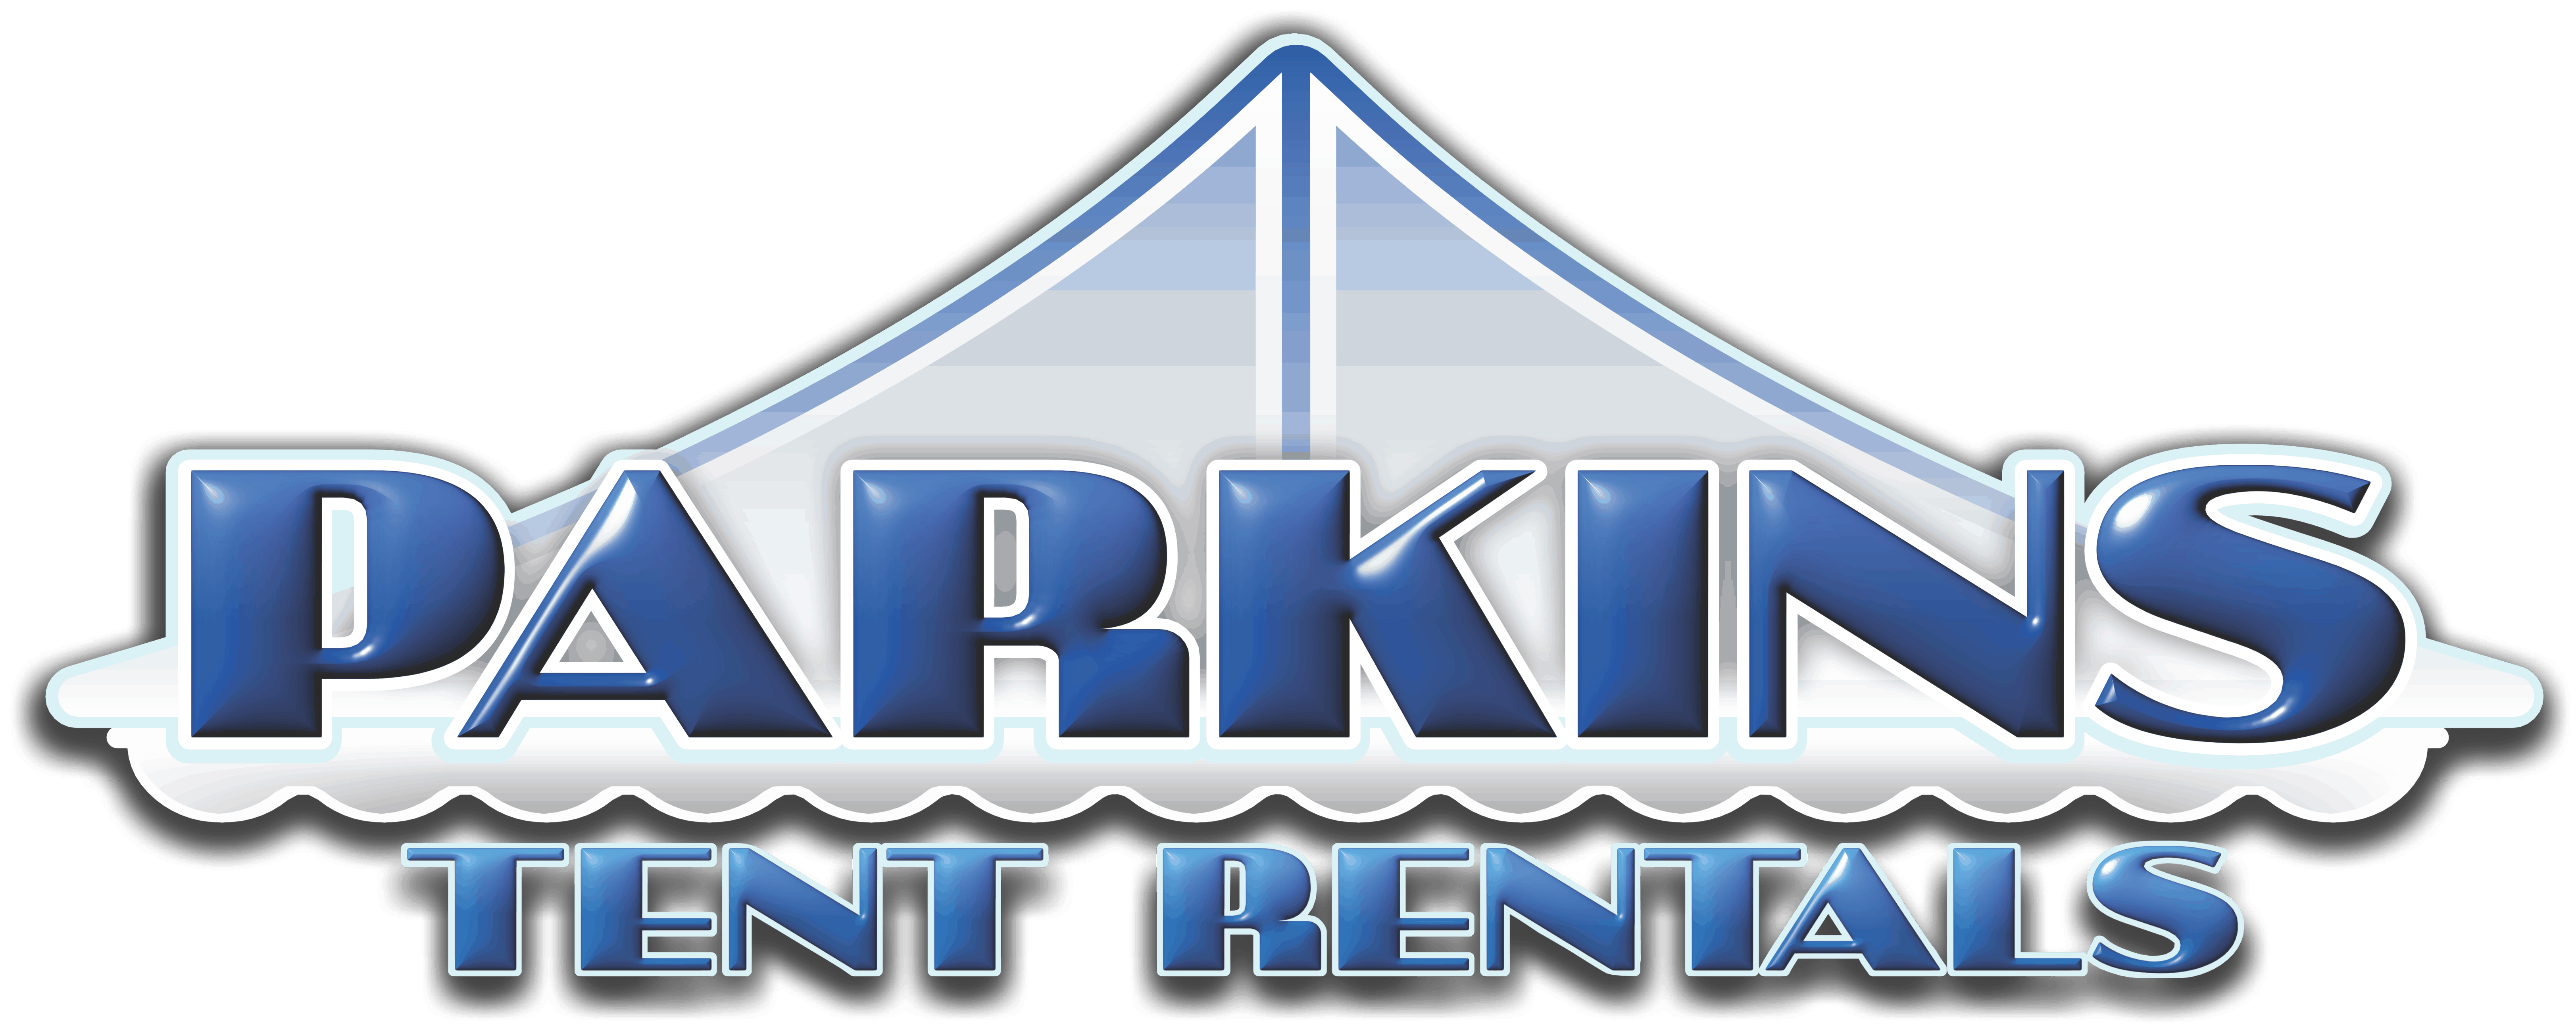 Tents for Rent PA